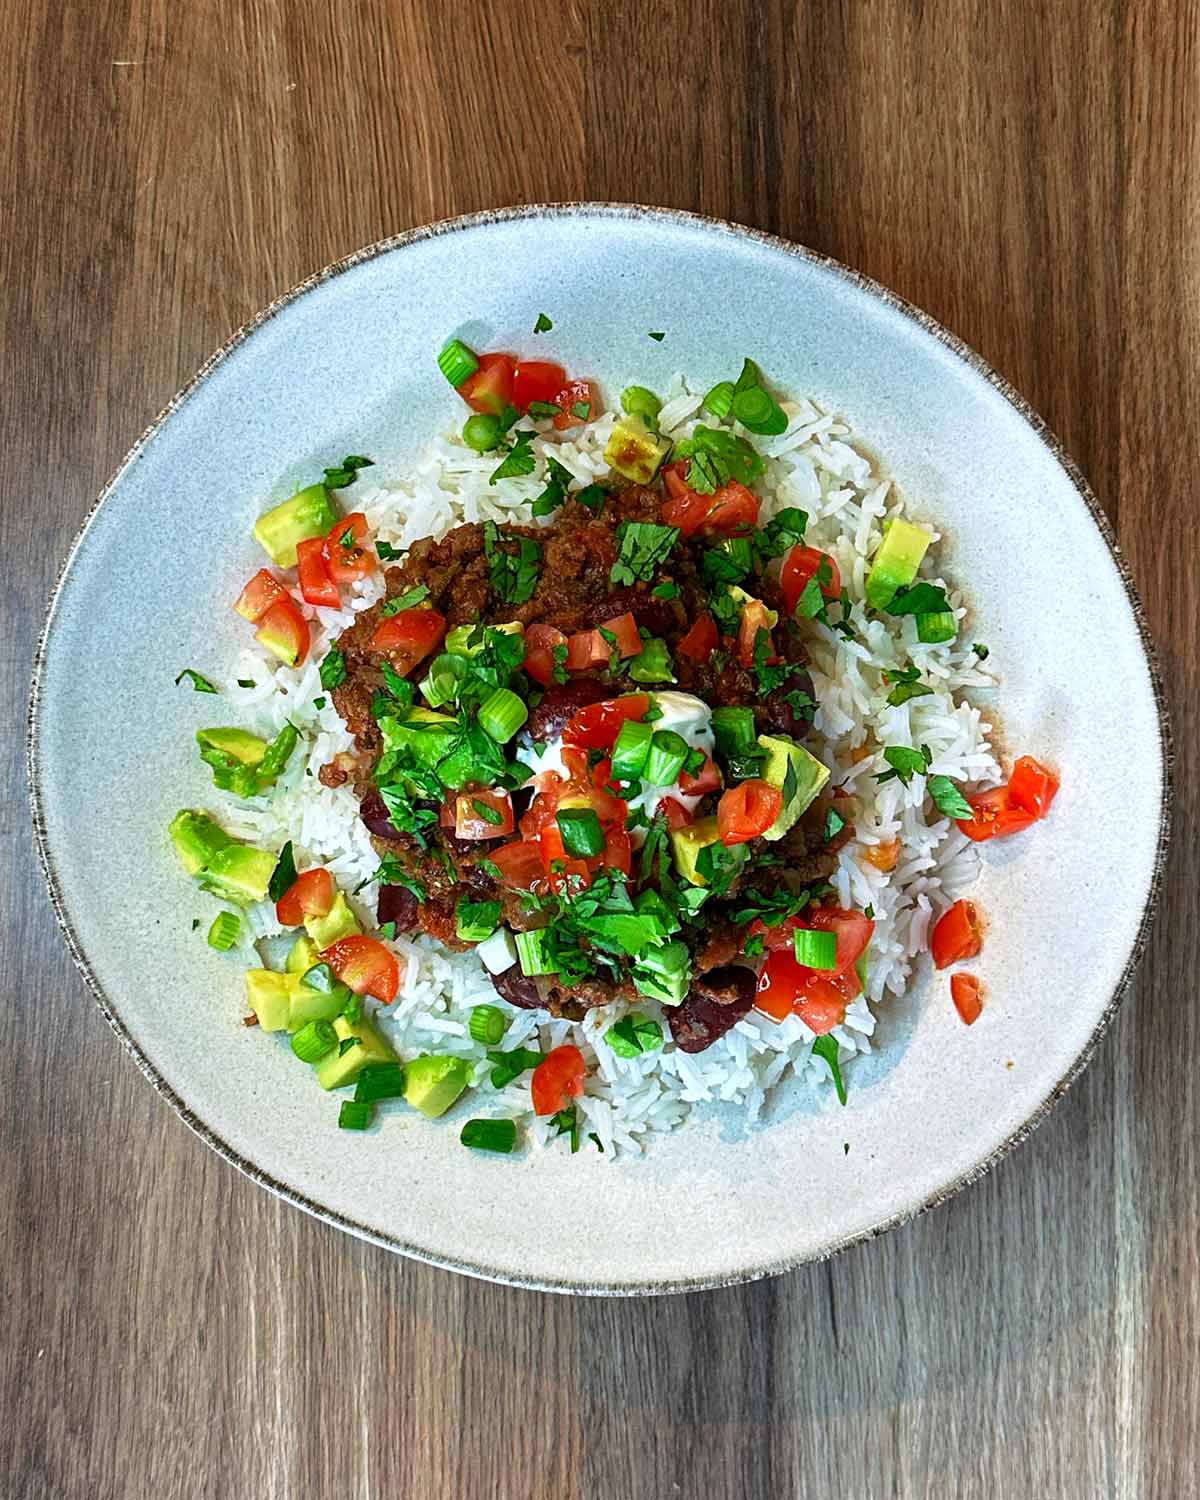 Chilli on rice topped with avocado, tomatoes, spring onions and coriander.